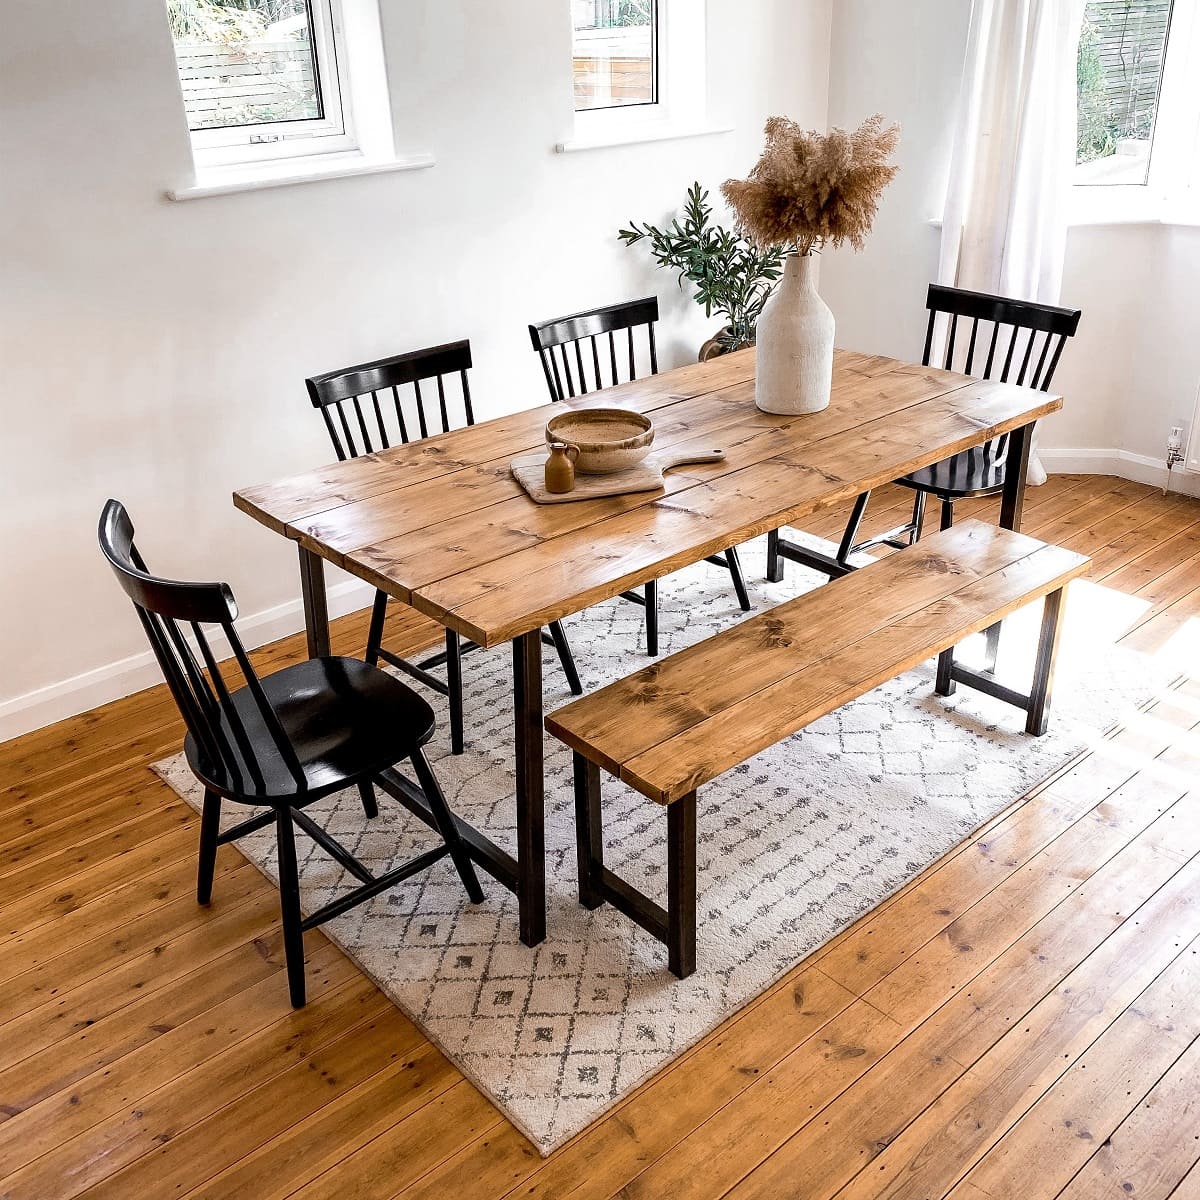 What Is A Dining Set?